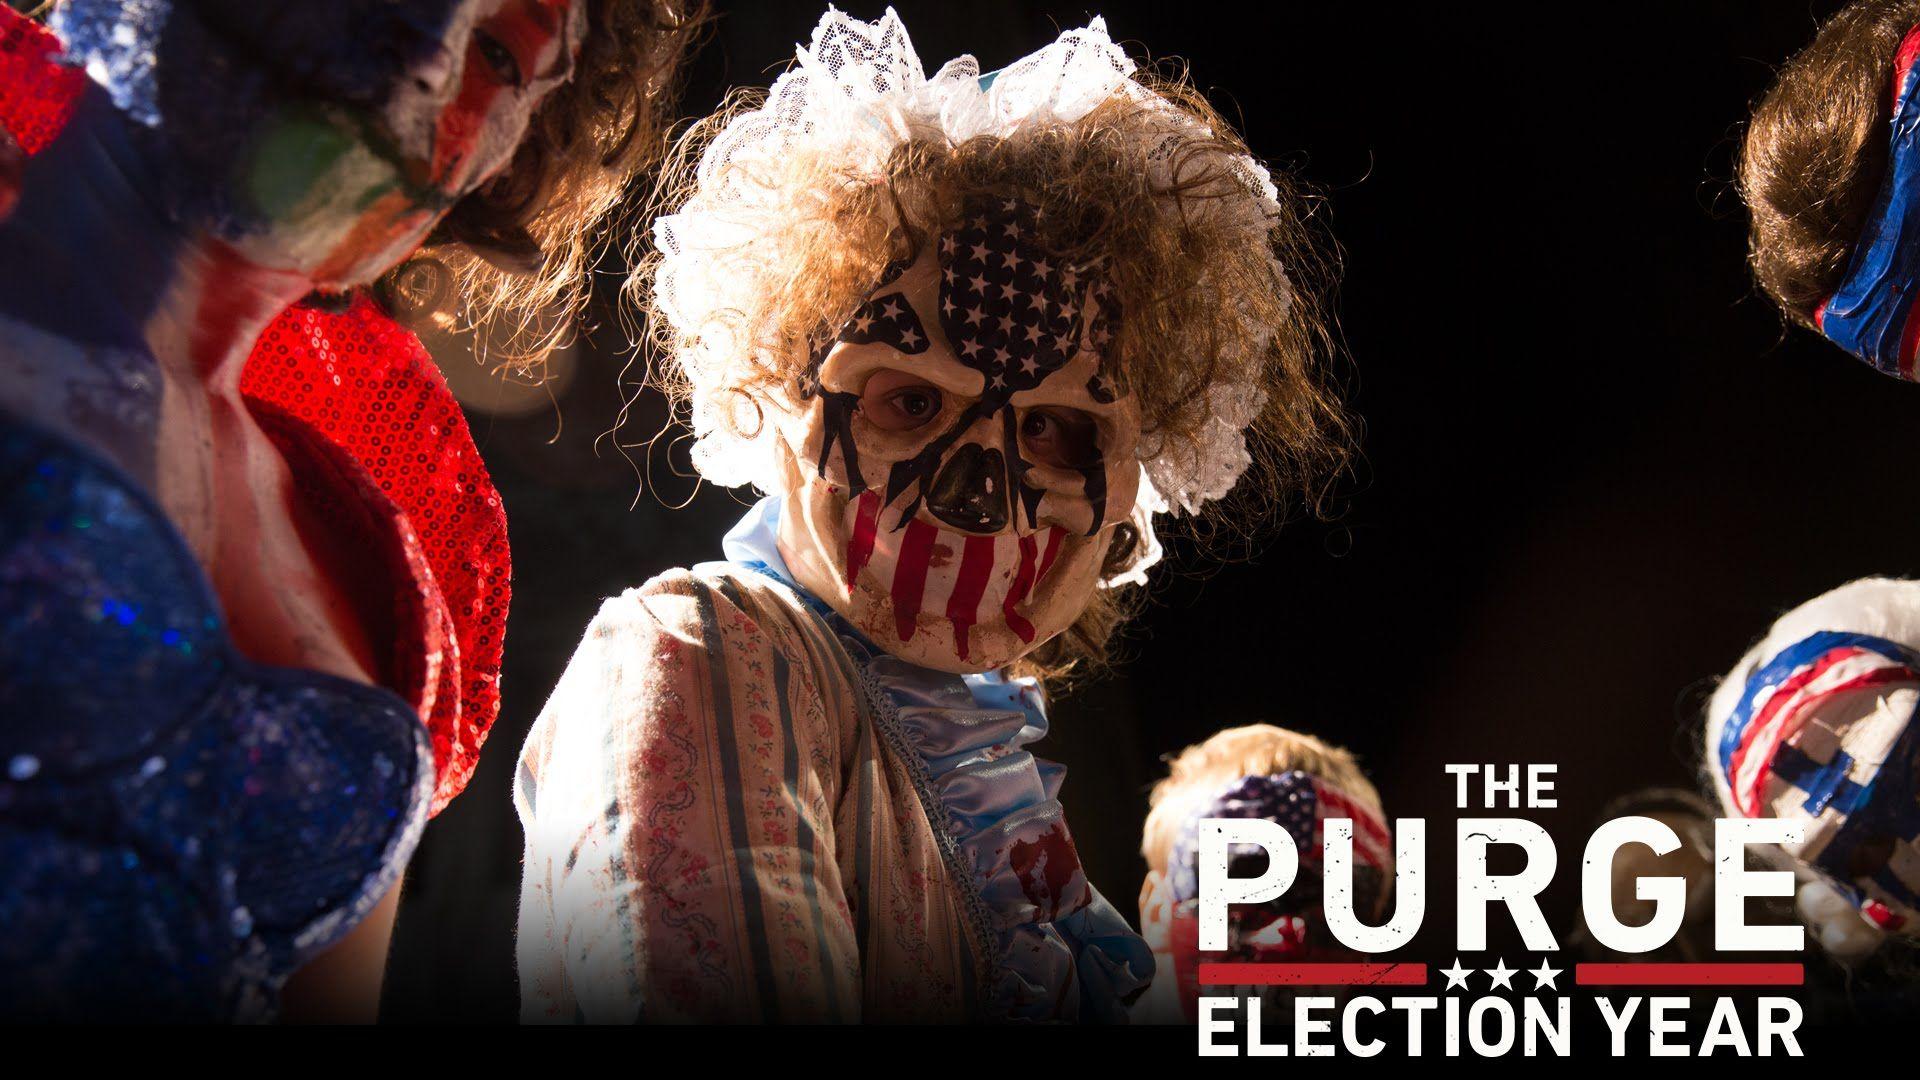 The Purge: Election Year Theaters Friday (TV Spot 11)